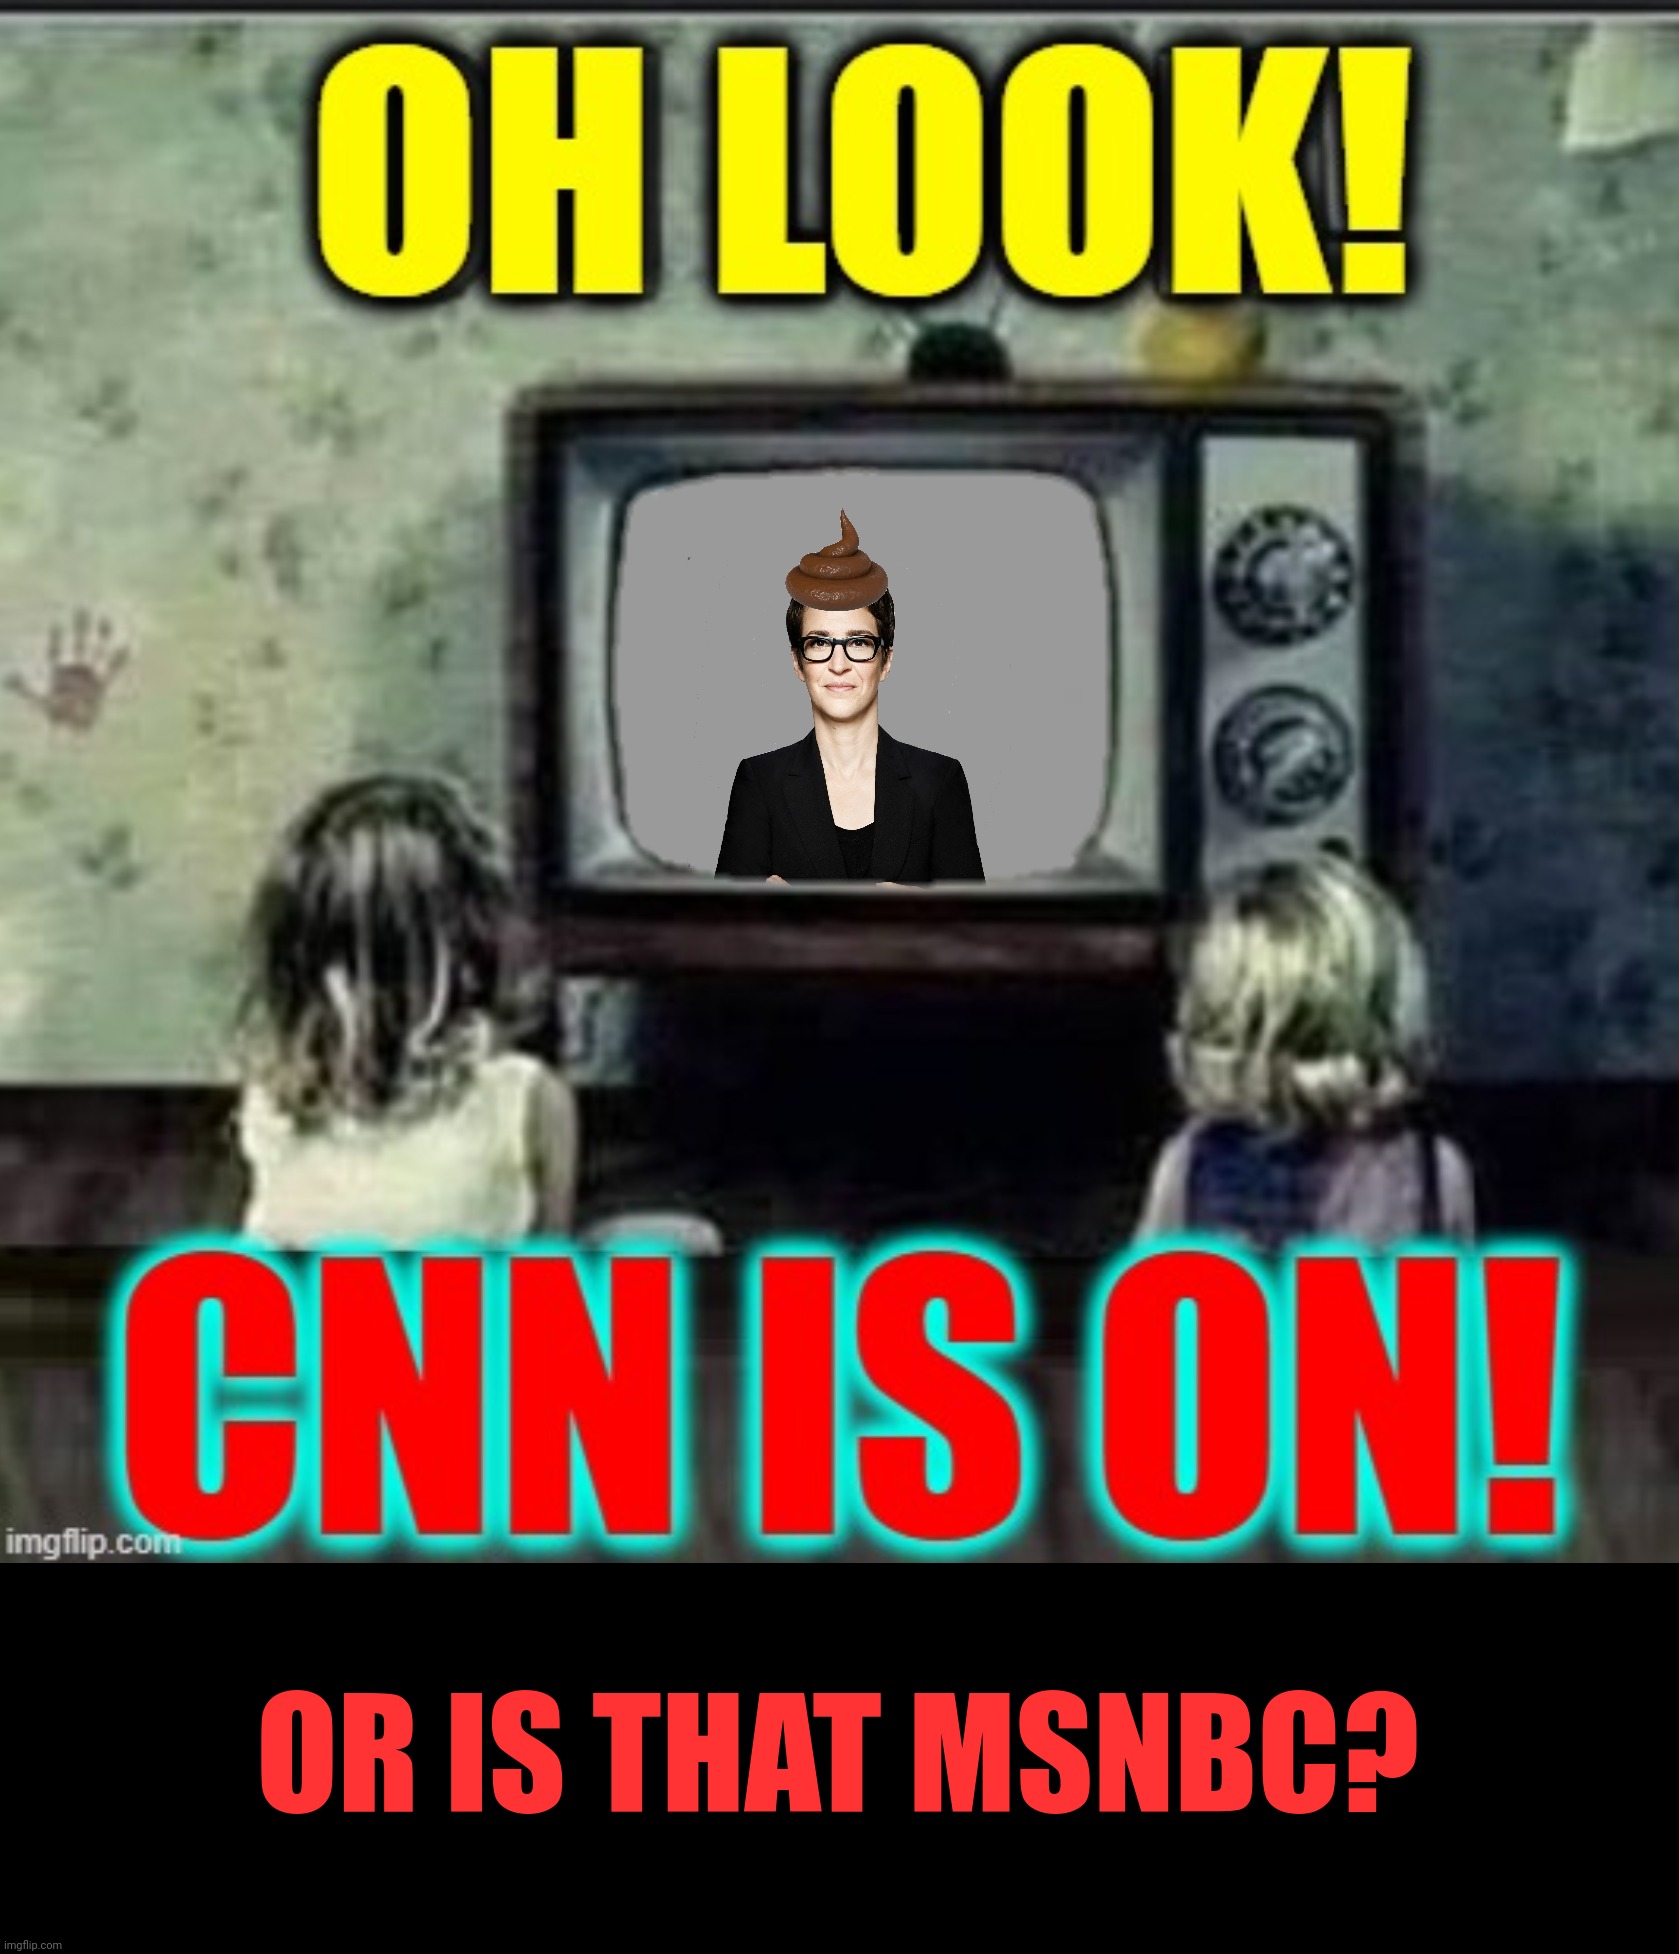 OR IS THAT MSNBC? | made w/ Imgflip meme maker